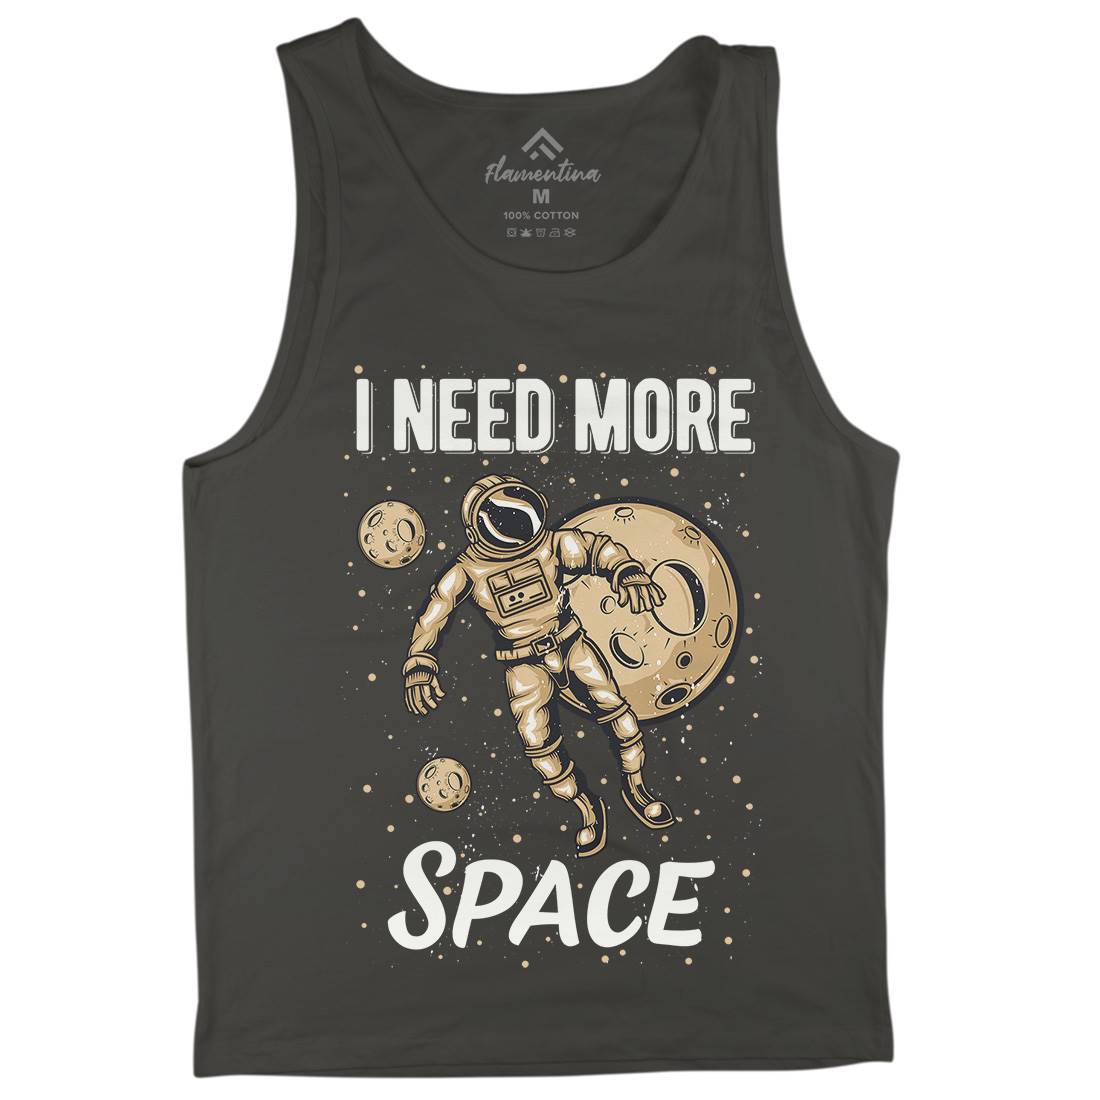 Need More Mens Tank Top Vest Space B168